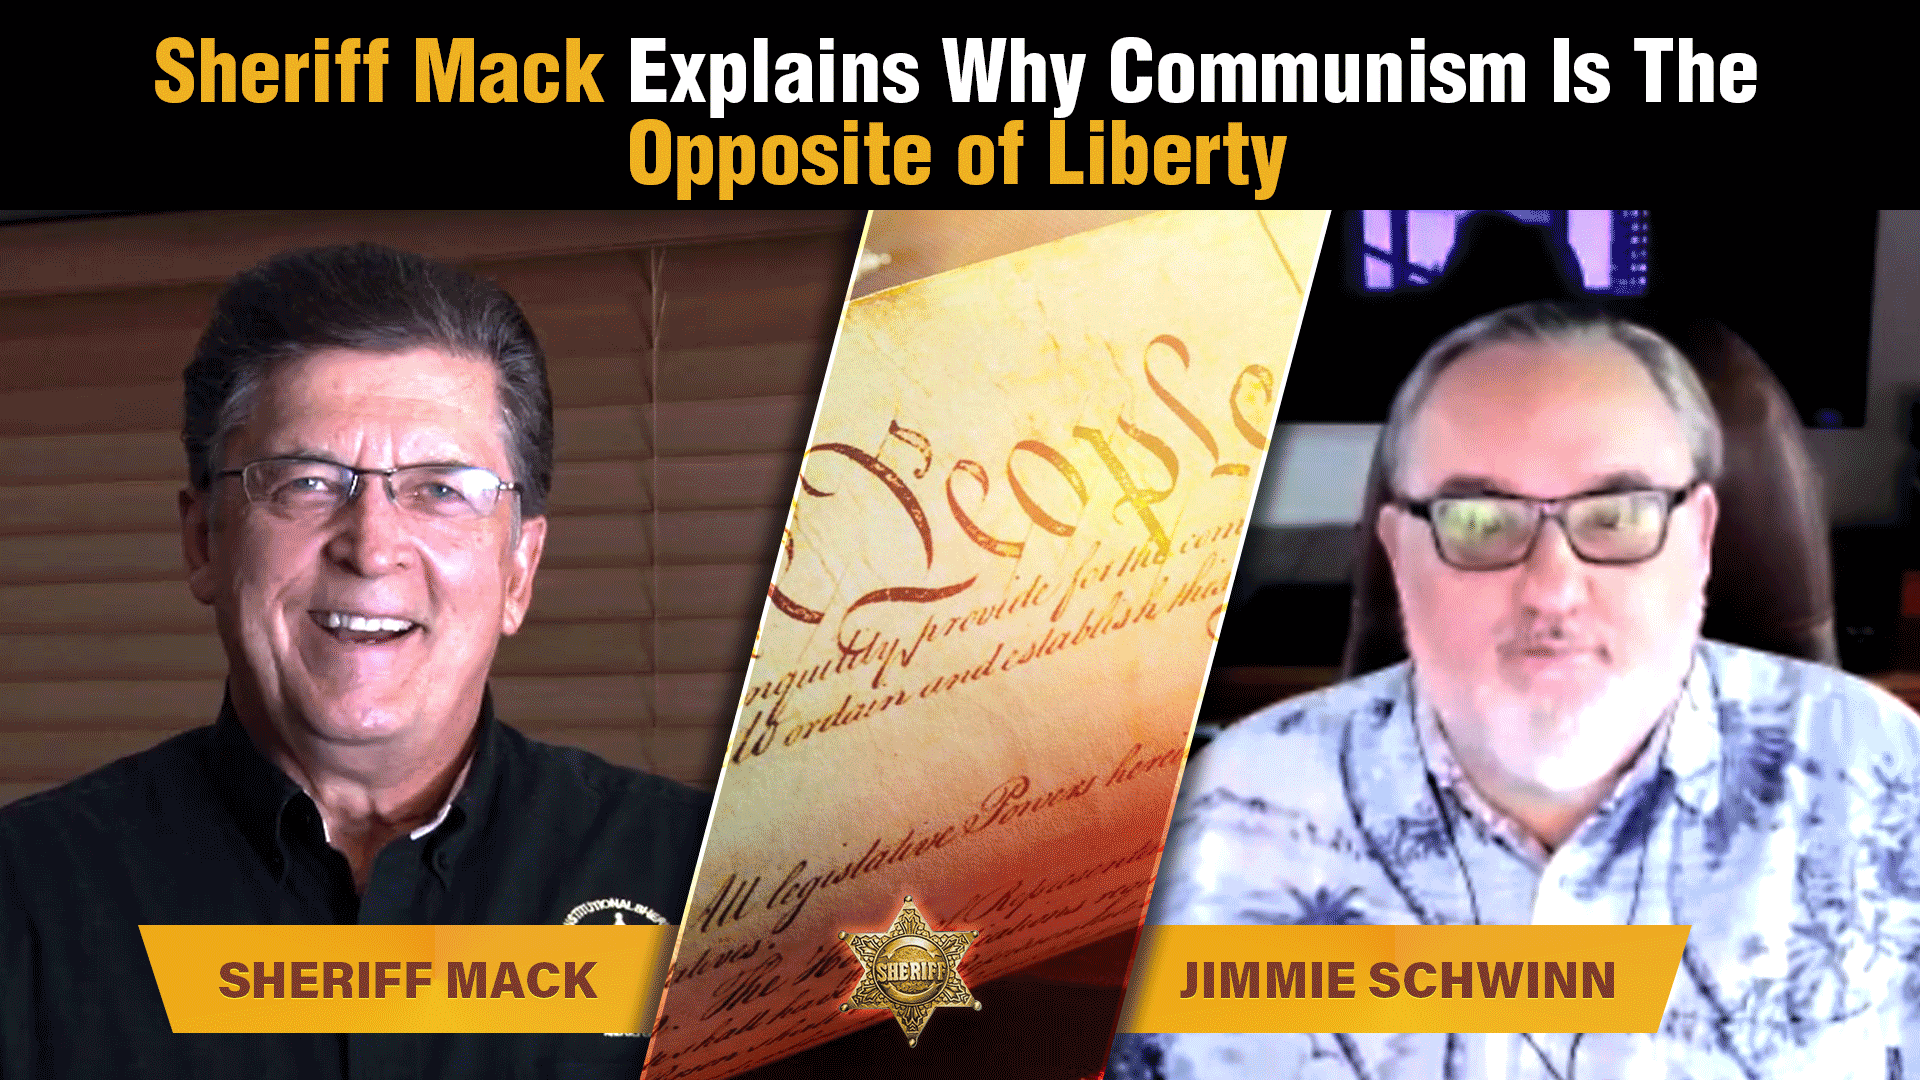 Sheriff Mack explains to Jimmie Schwinn from My Patriots Network why communism and socialism never work.